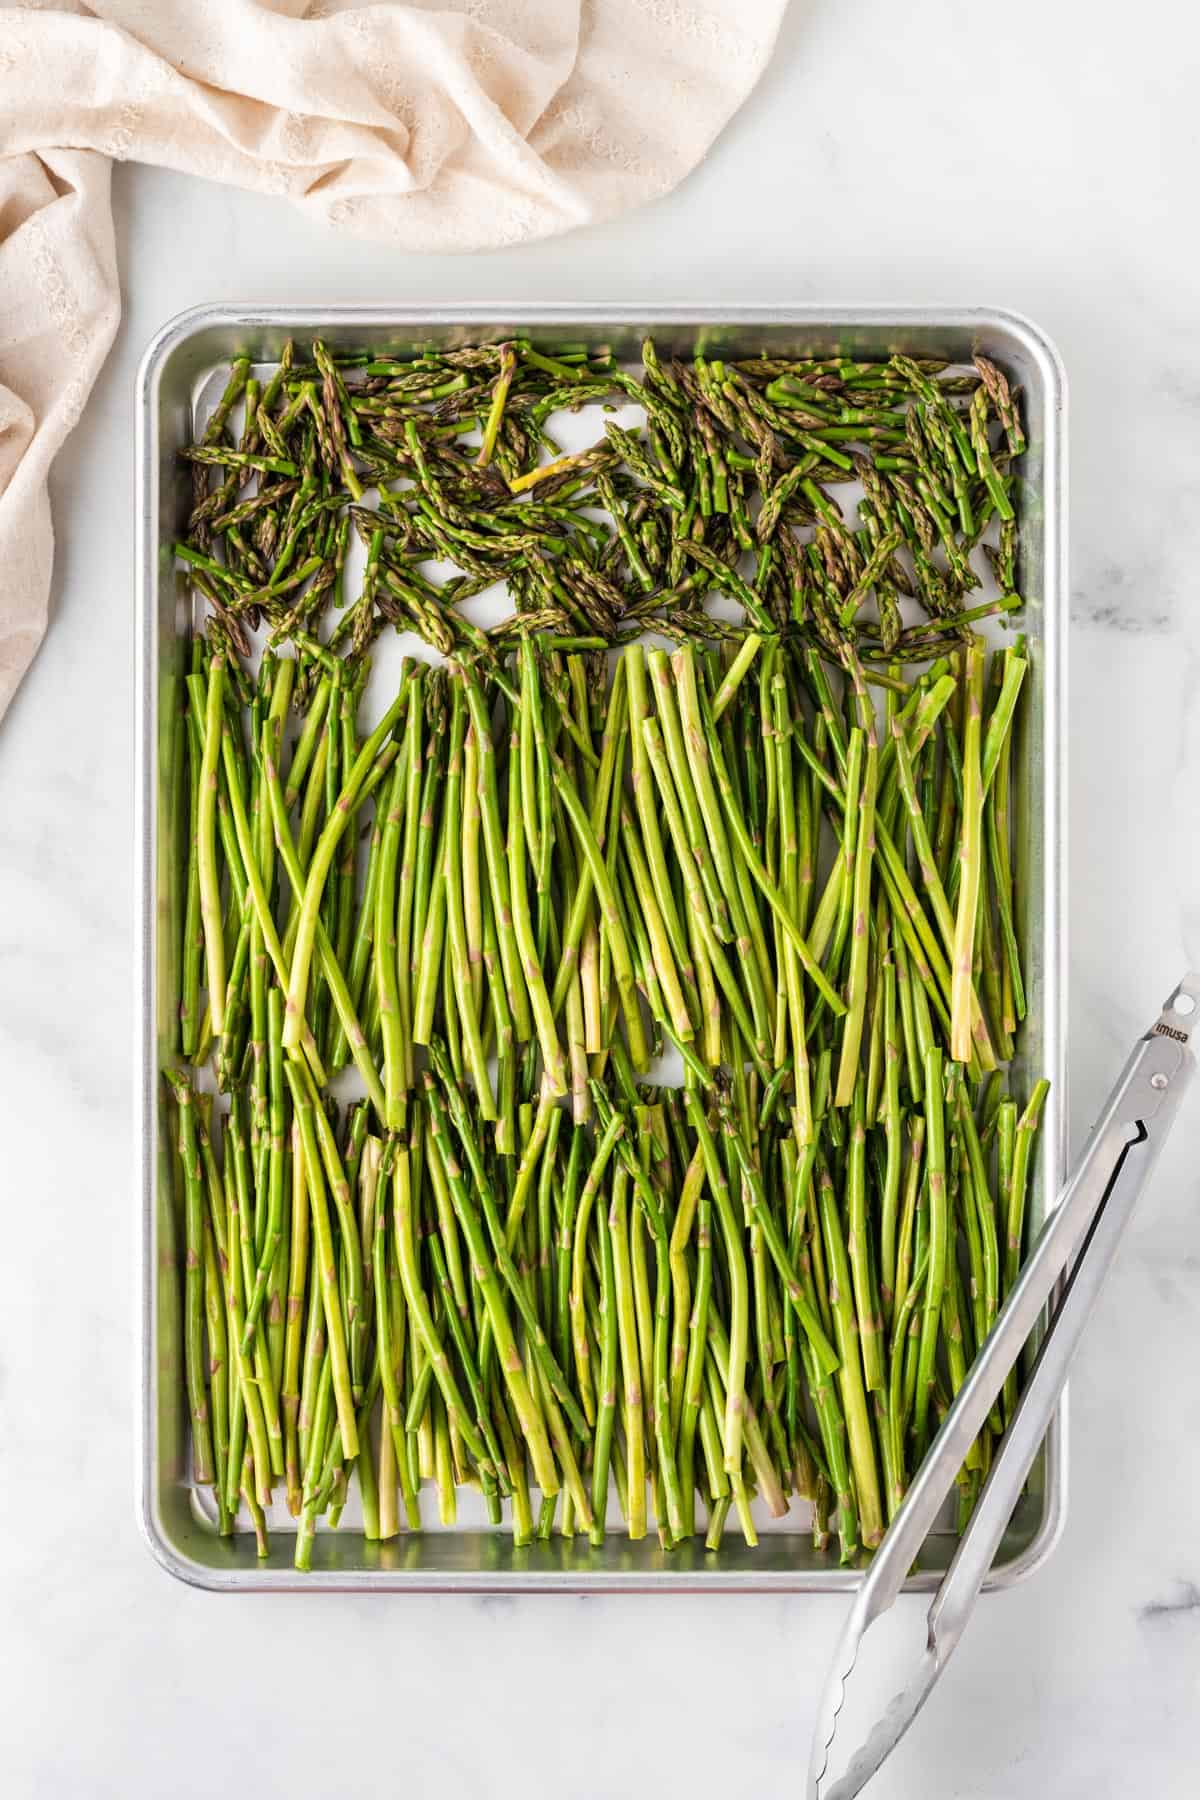 A picture of asparagus stalks on a sheet pan to be roasted.